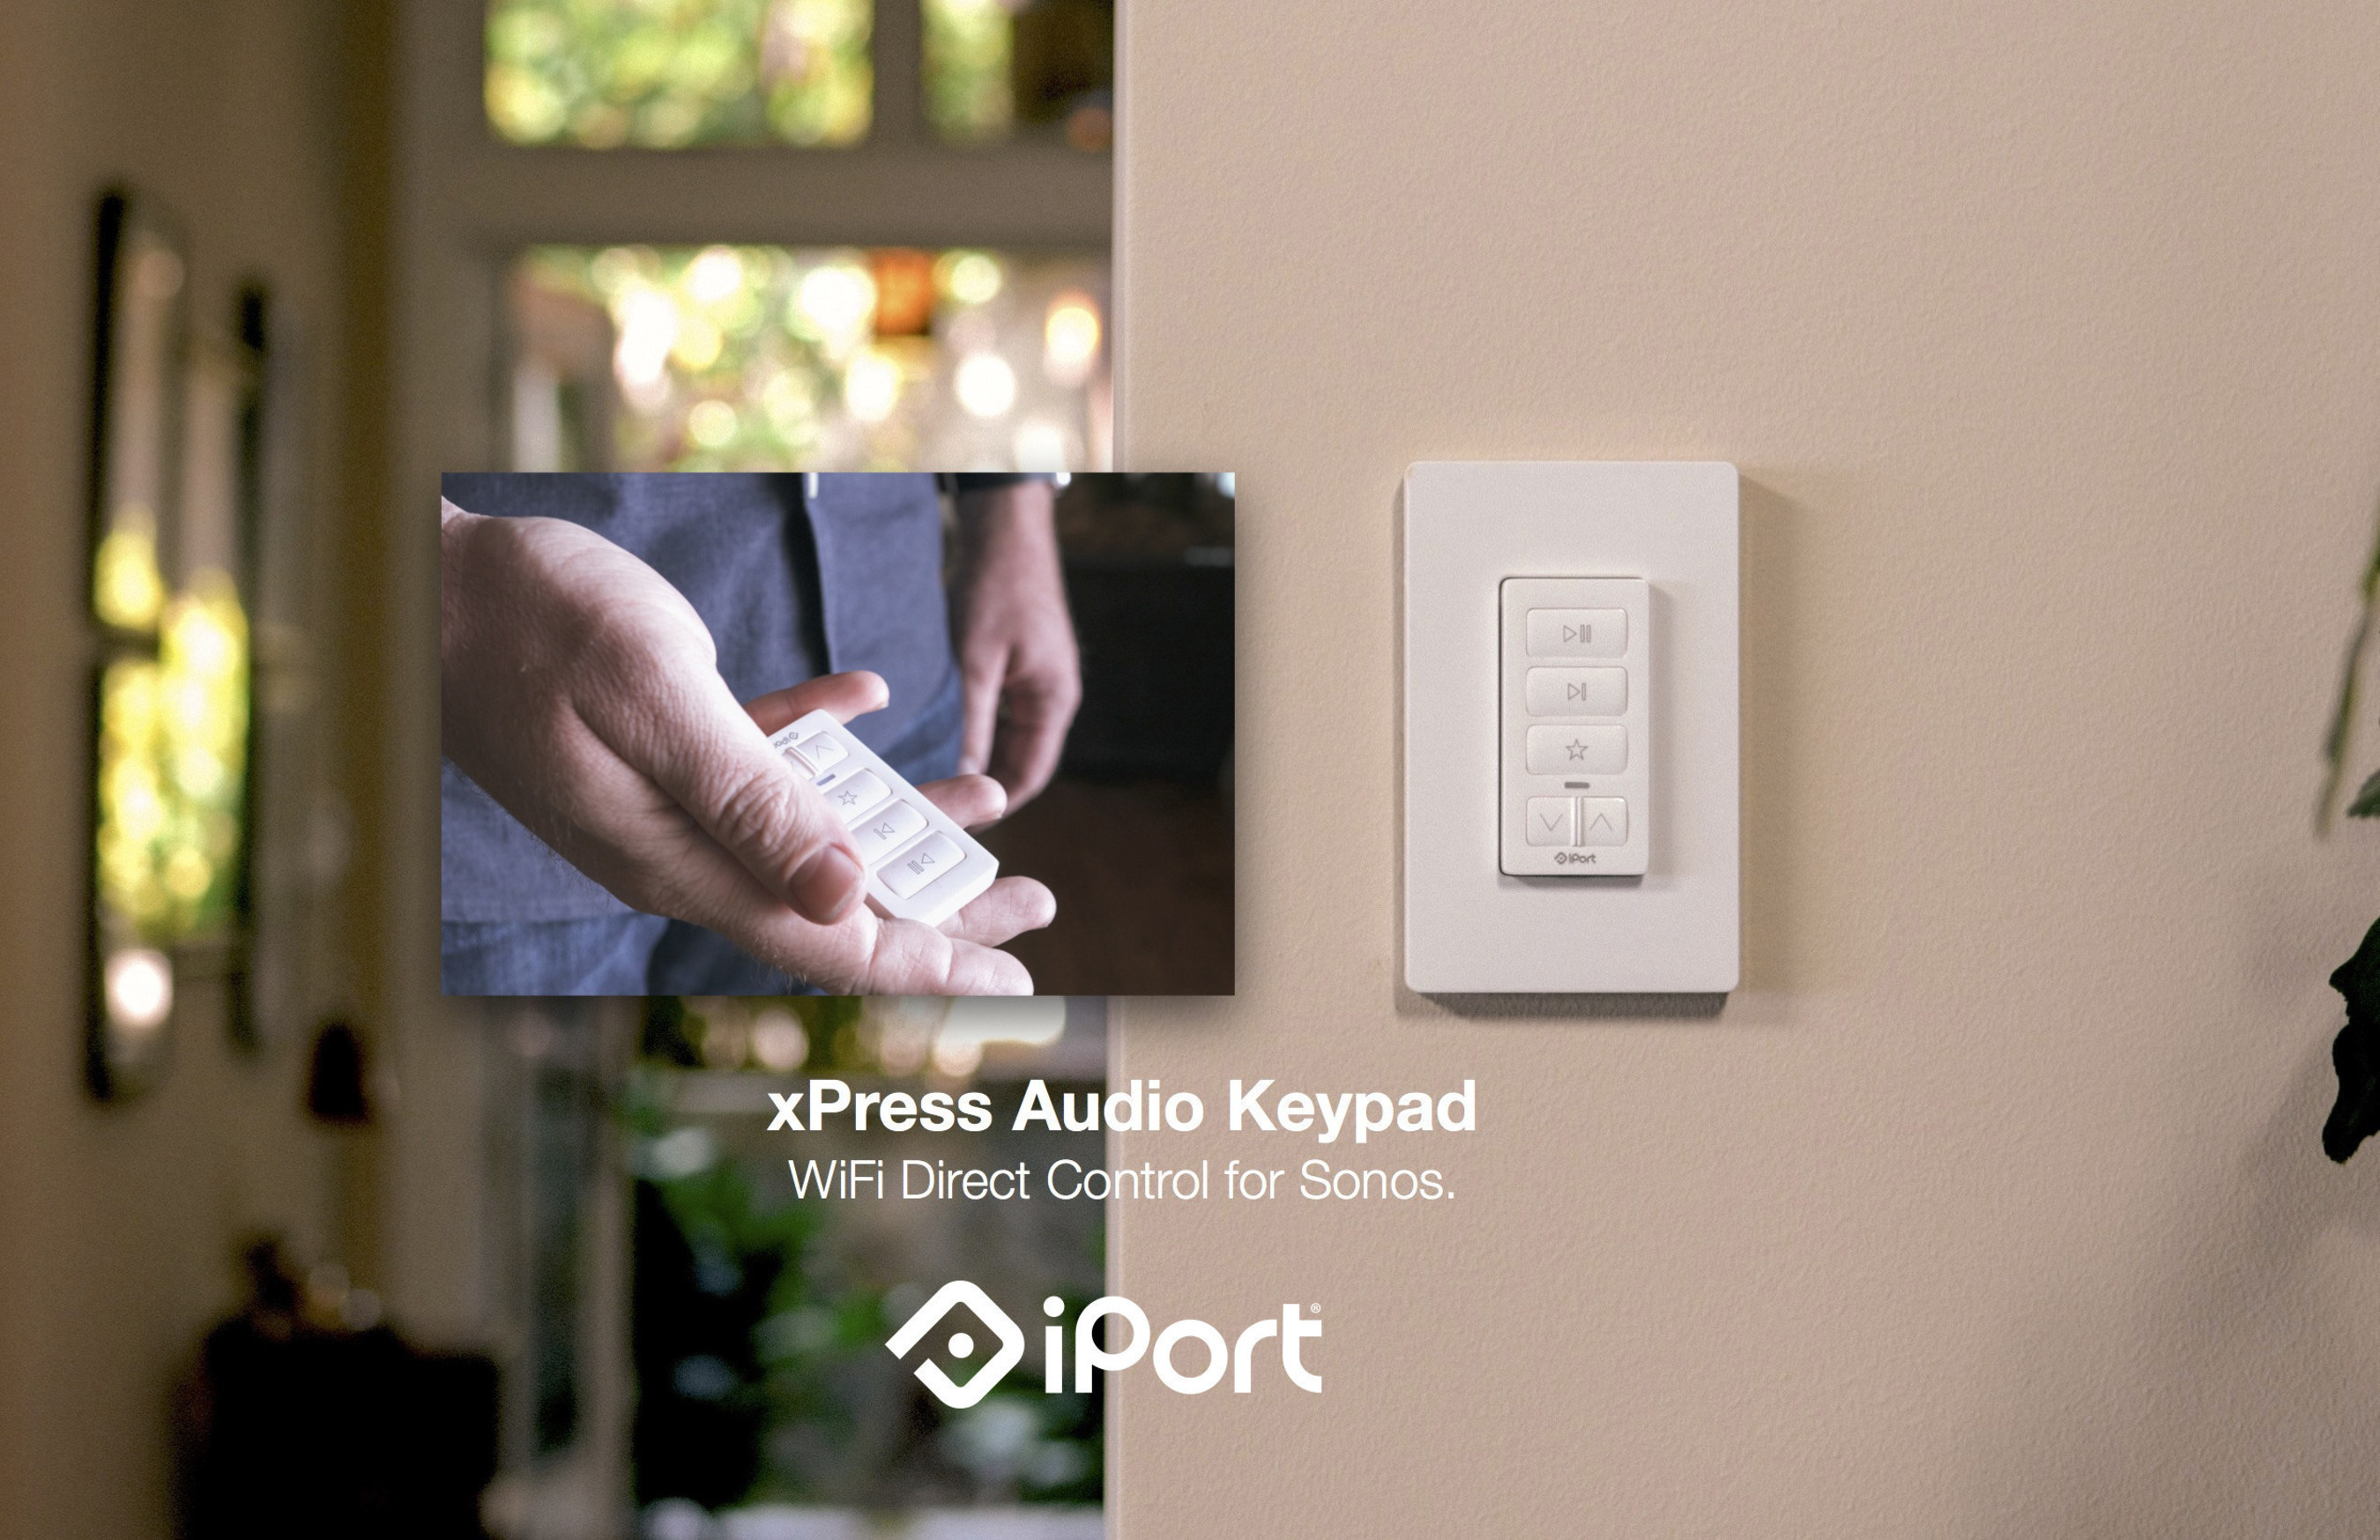 iPort(R) Announces The xPRESS(TM) Audio Keypad for Sonos(R): Direct WiFi Control for Any Sonos Device.